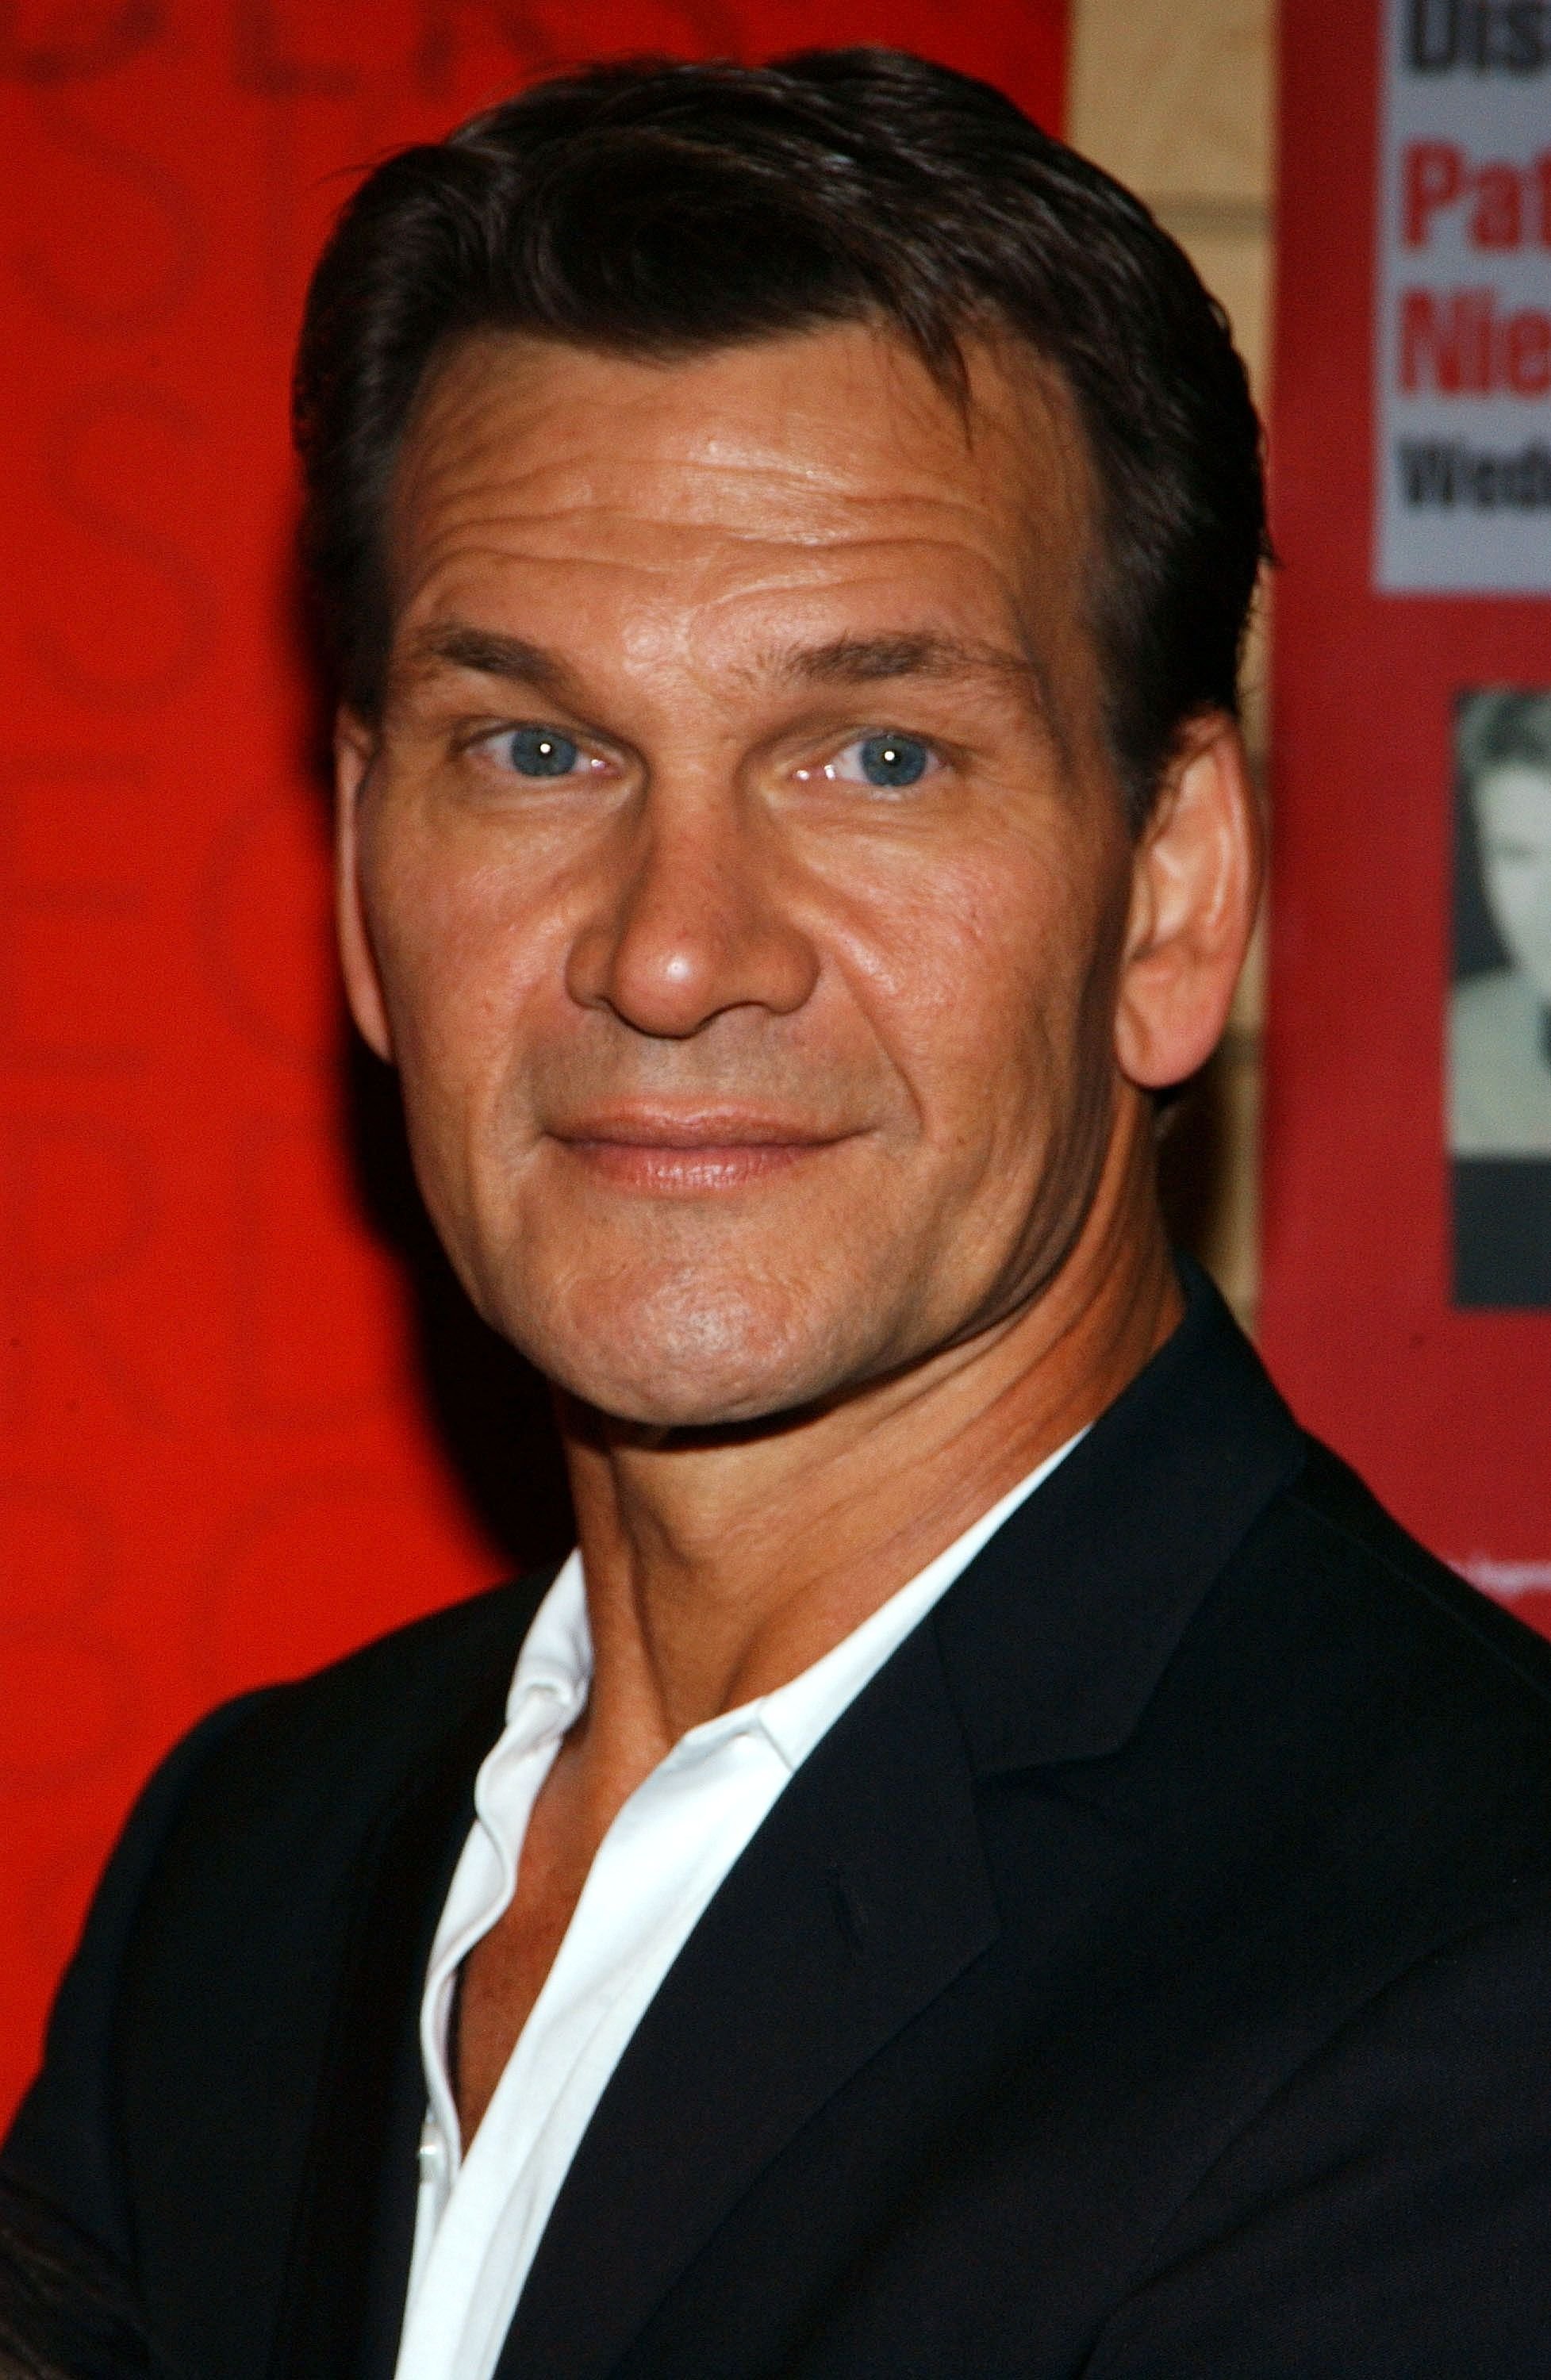 Patrick Swayze at Borders Bookstore to sign copies of his new movie "One Last Dance" on August 24, 2005, in New York City | Photo: Bryan Bedder/Getty Images